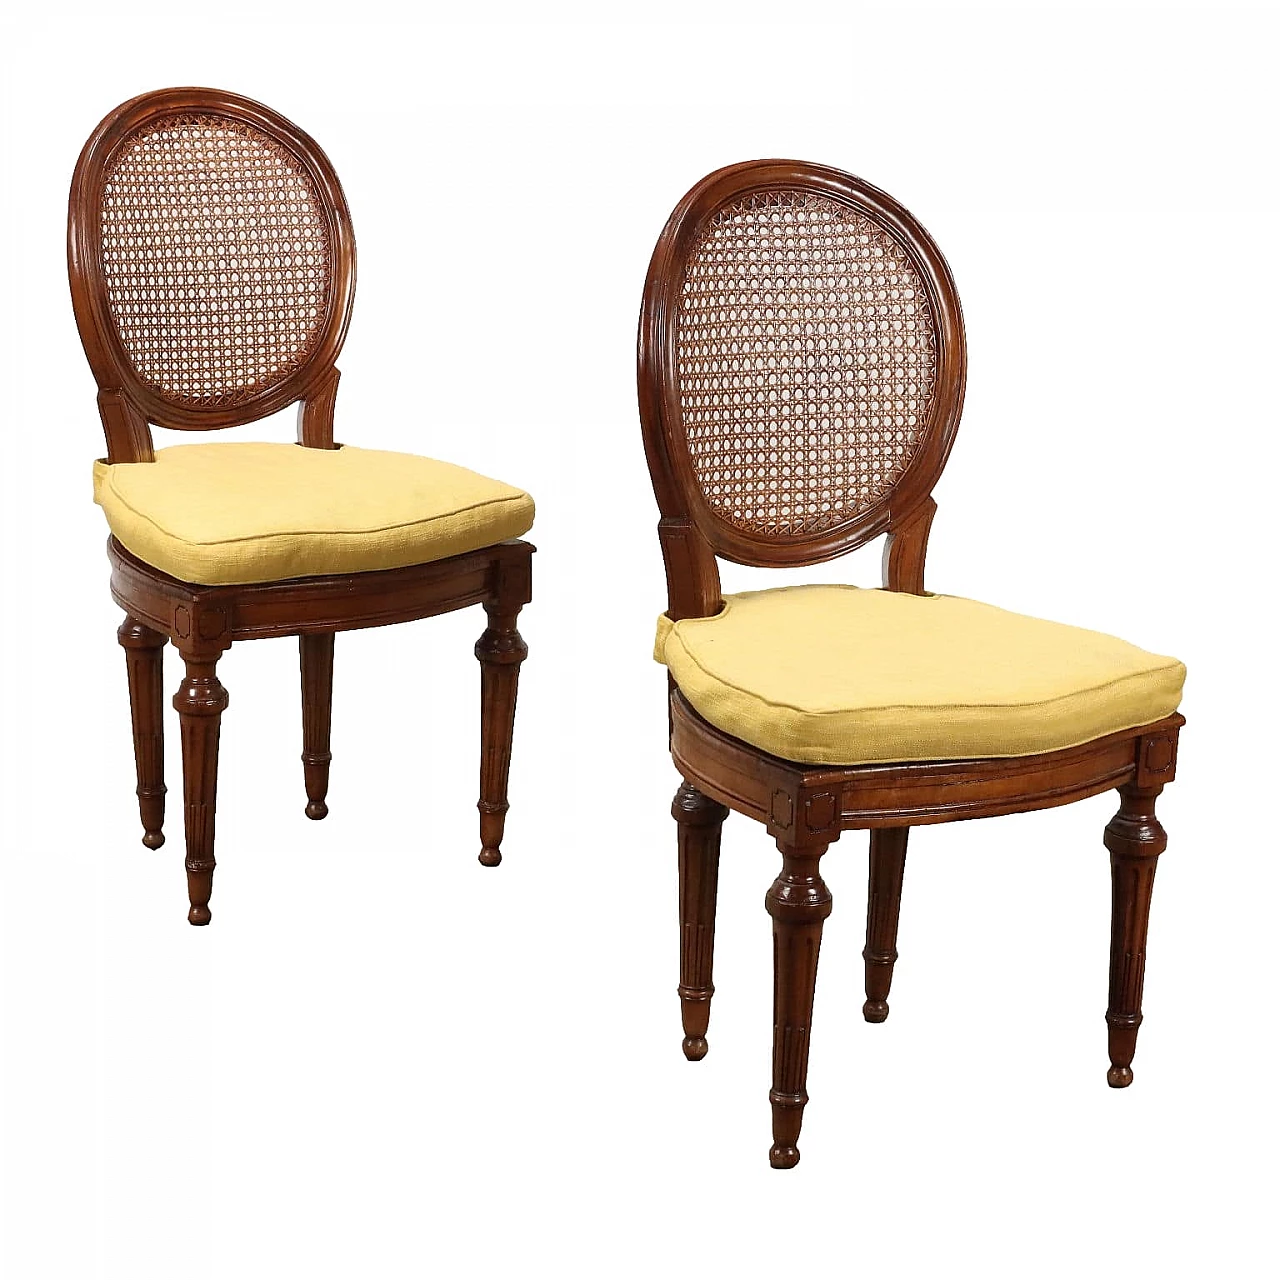 Pair of walnut and cane chairs with removable cushions, 18th century 1